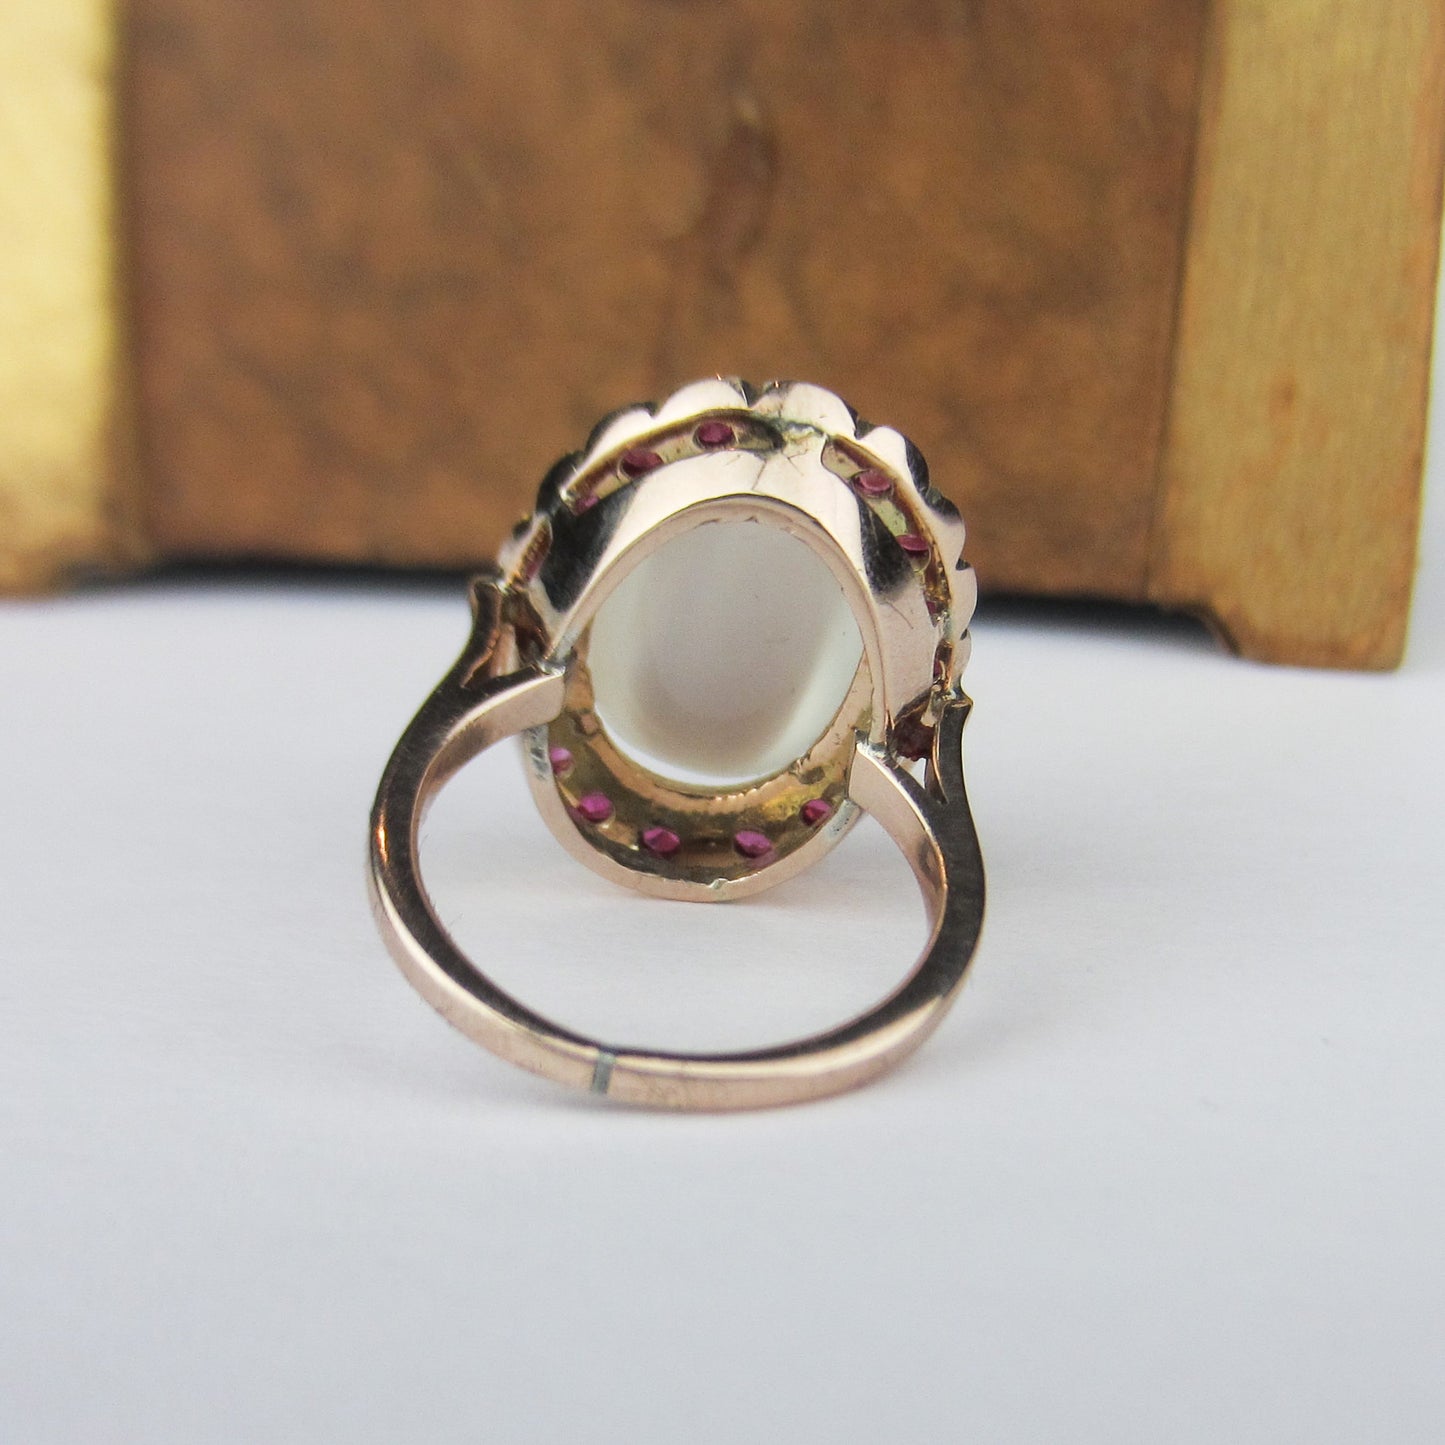 SOLD—Retro Moonstone and Ruby Ring 14k c. 1940